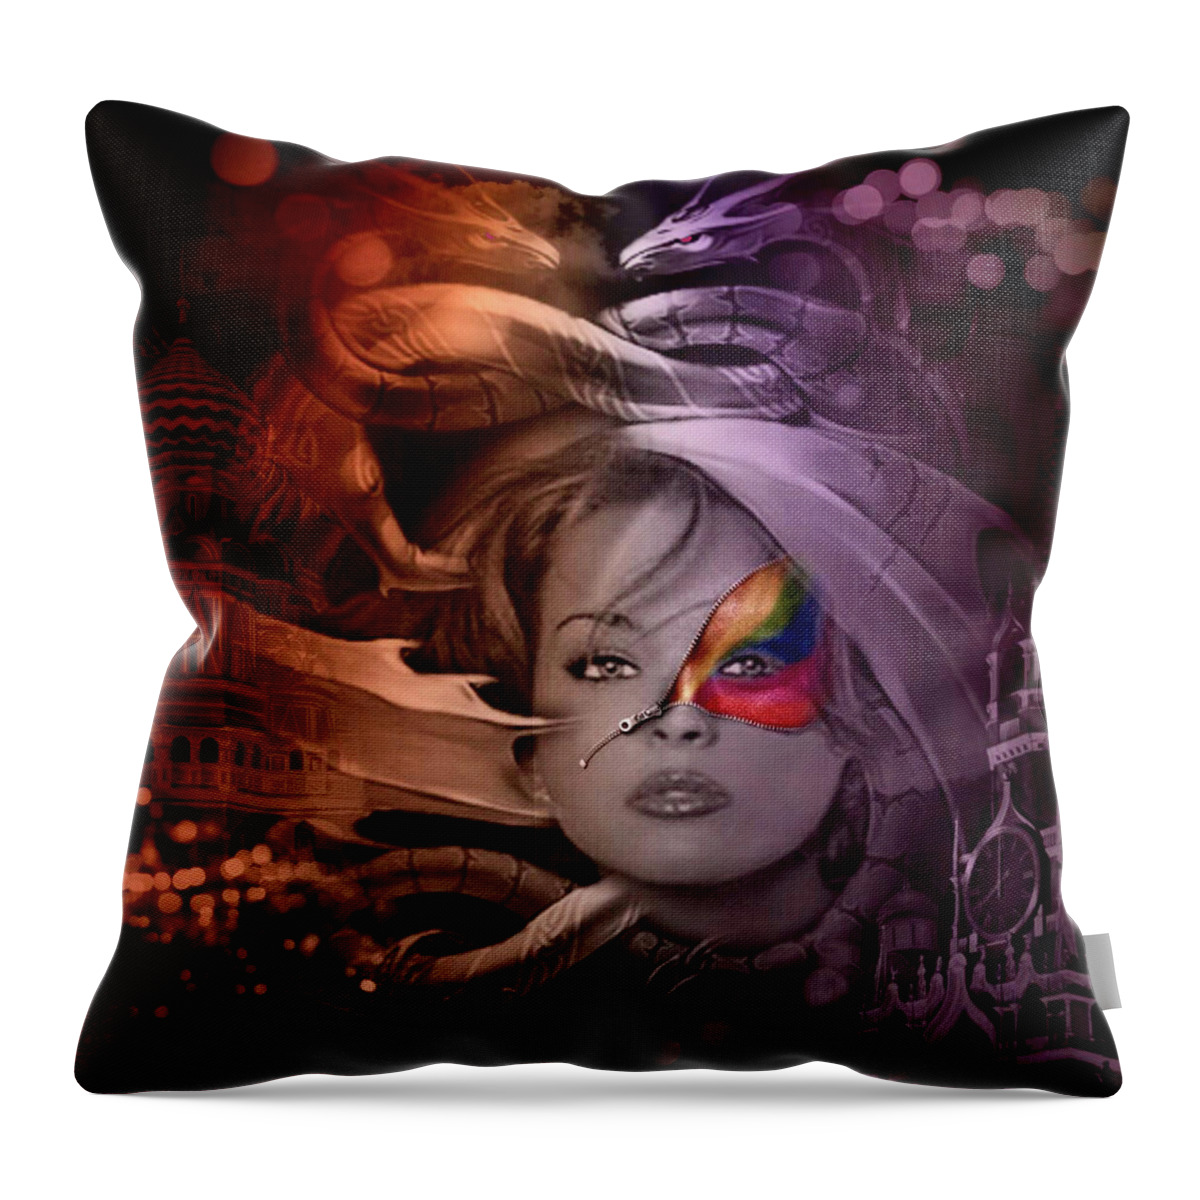 Portrait Throw Pillow featuring the digital art Dragon Dreams by Kathy Kelly